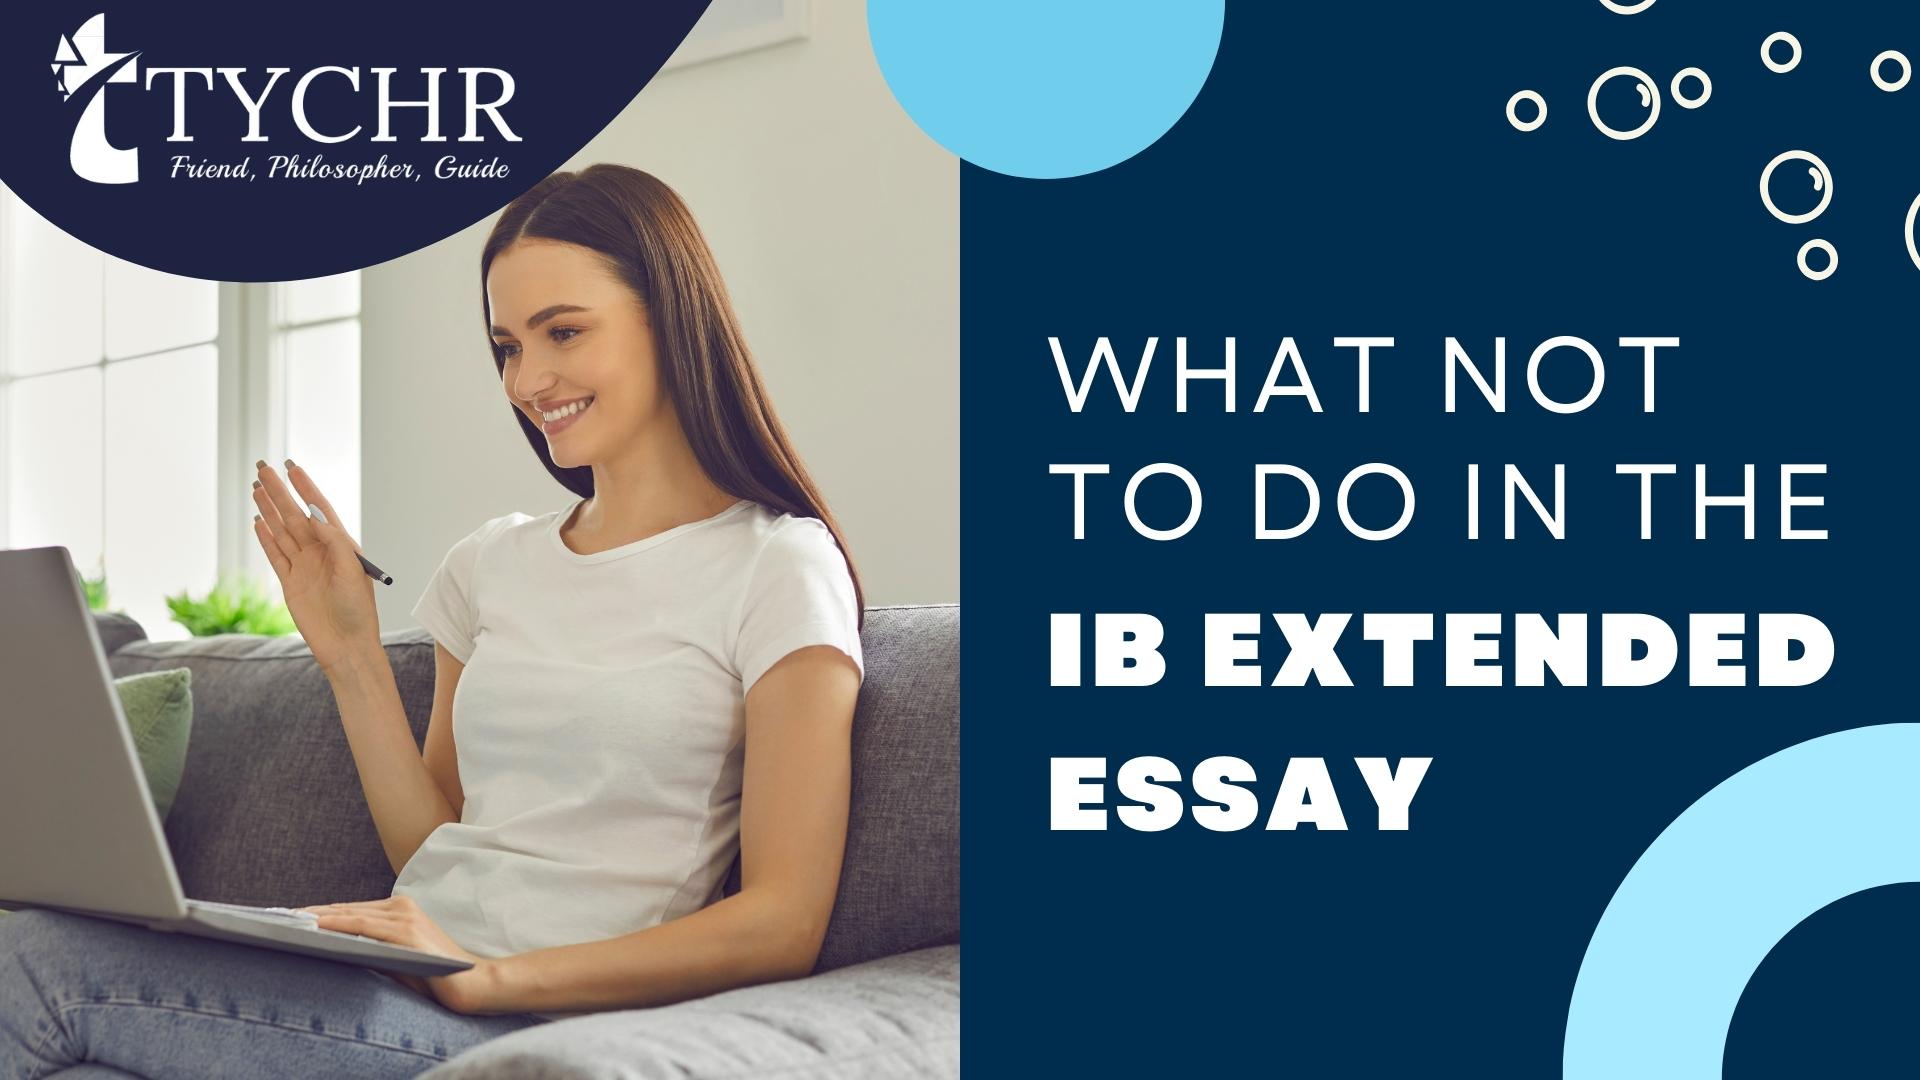 You are currently viewing What Not to do in the Extended Essay [IB]